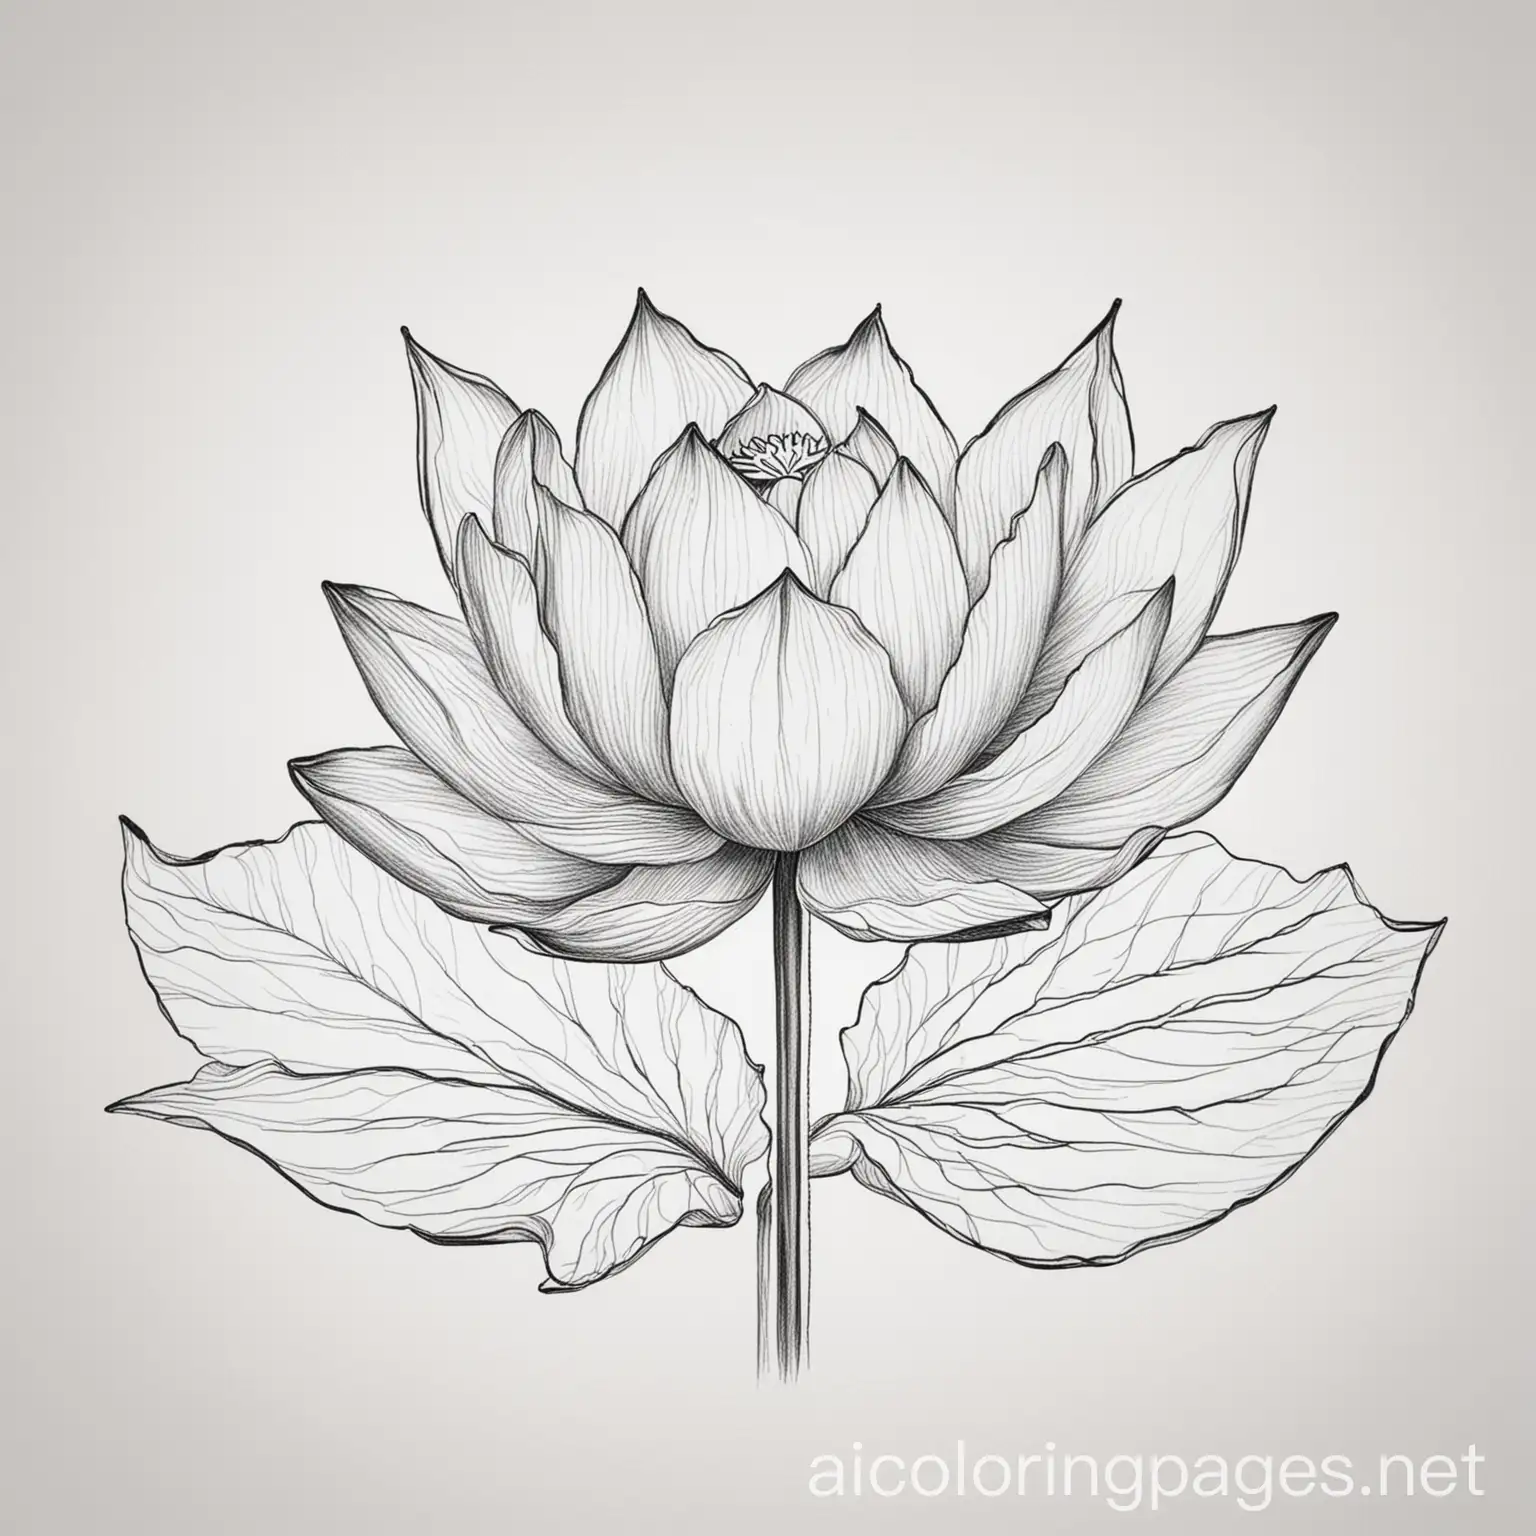 Lotus flower watercolor, Coloring Page, black and white, line art, white background, Simplicity, Ample White Space. The background of the coloring page is plain white to make it easy for young children to color within the lines. The outlines of all the subjects are easy to distinguish, making it simple for kids to color without too much difficulty